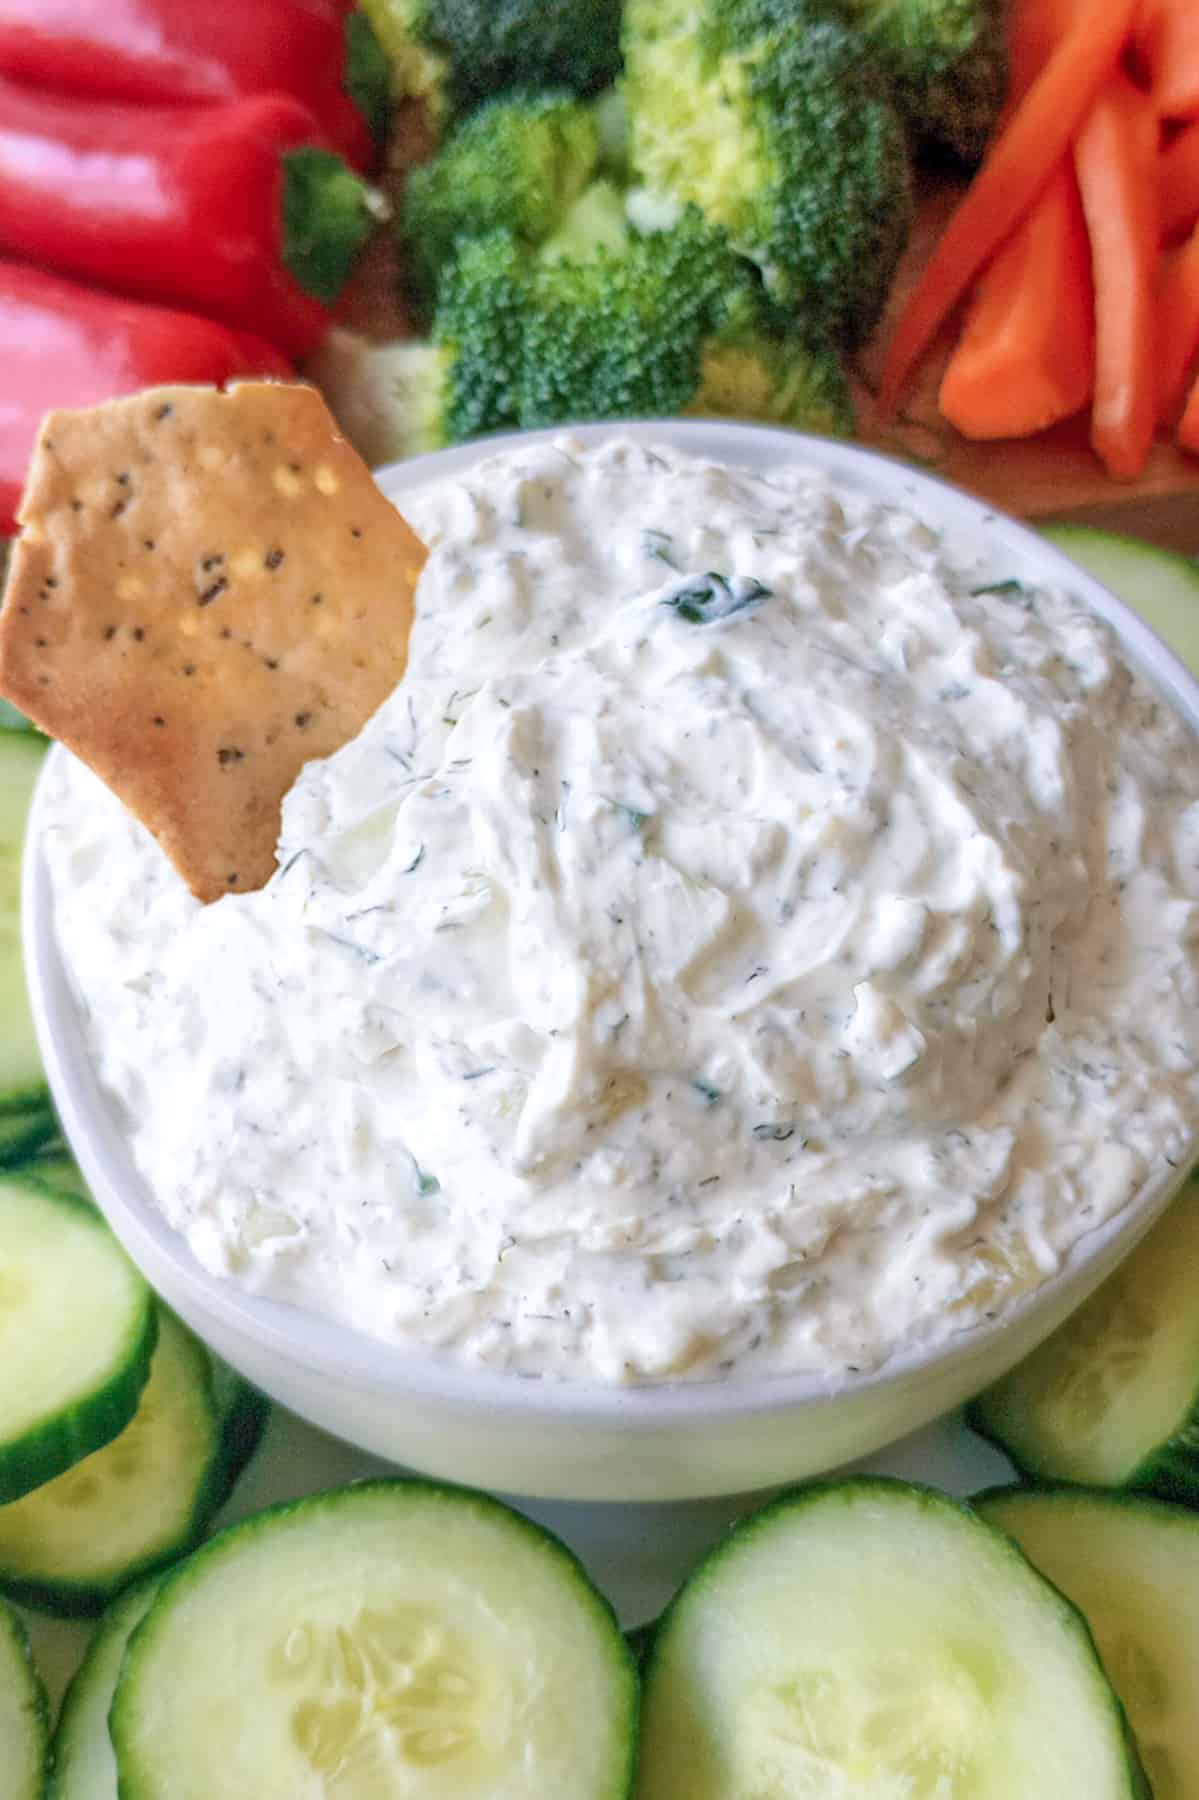 Cucumber dill dip with gluten free everything bagel chip.